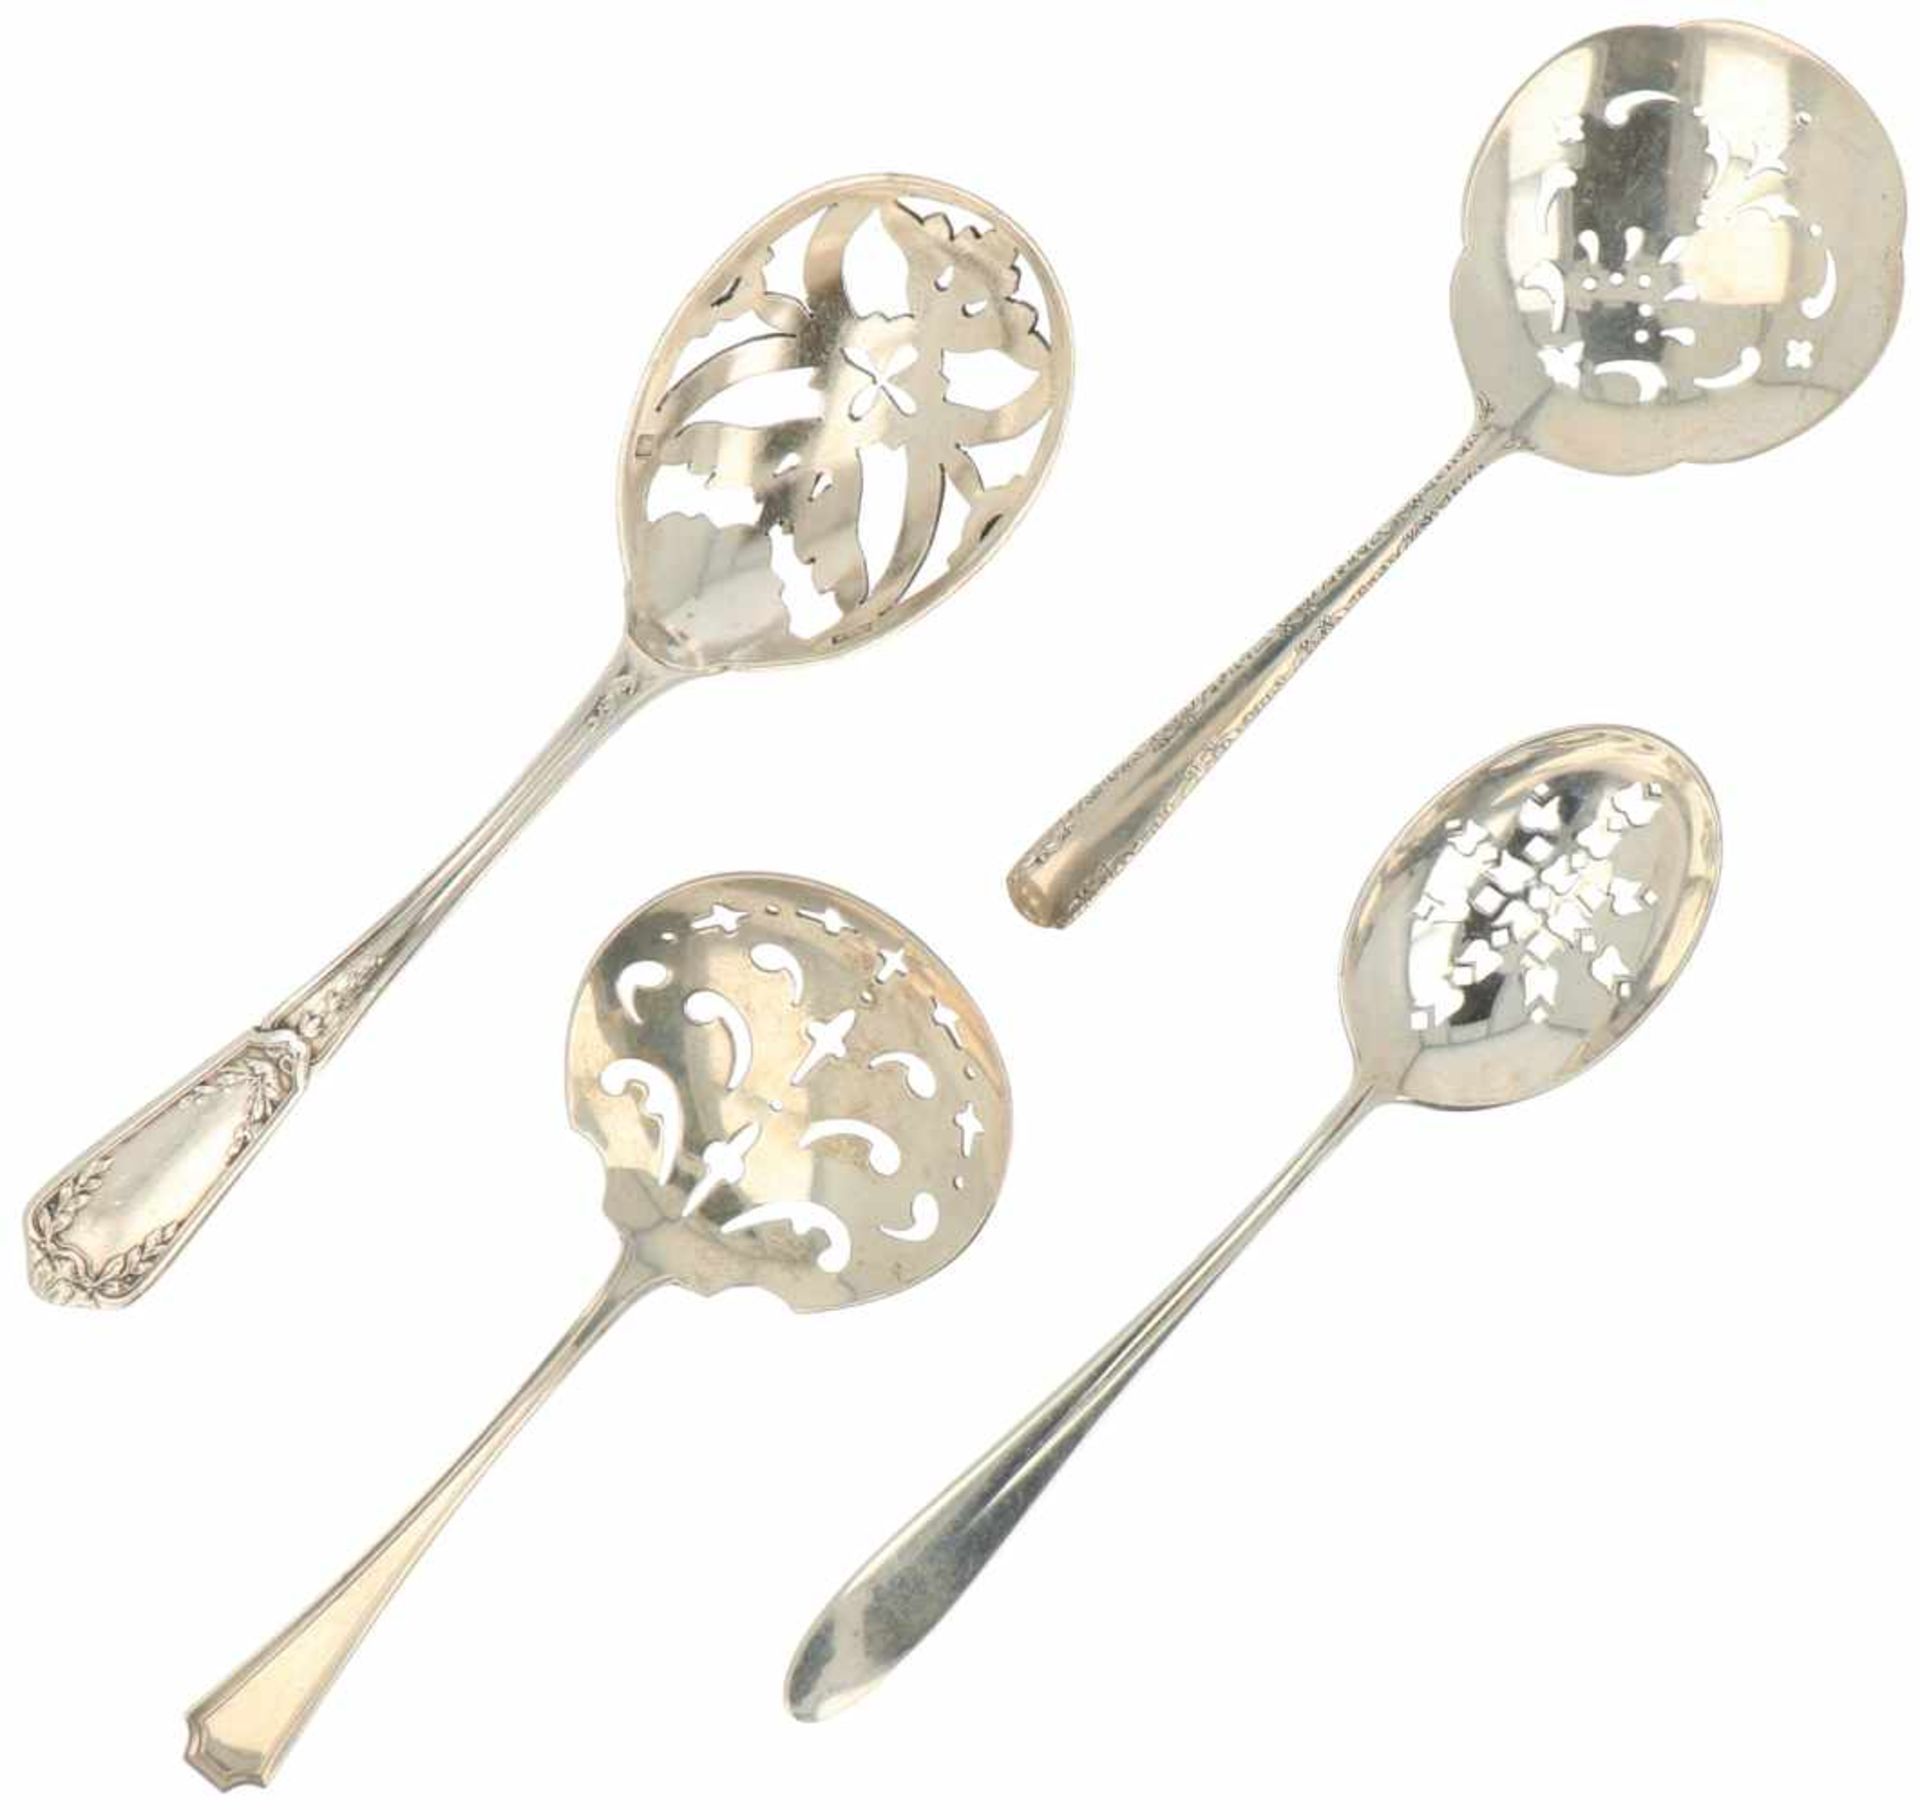 (4) Pieces of silver fruit spoons.